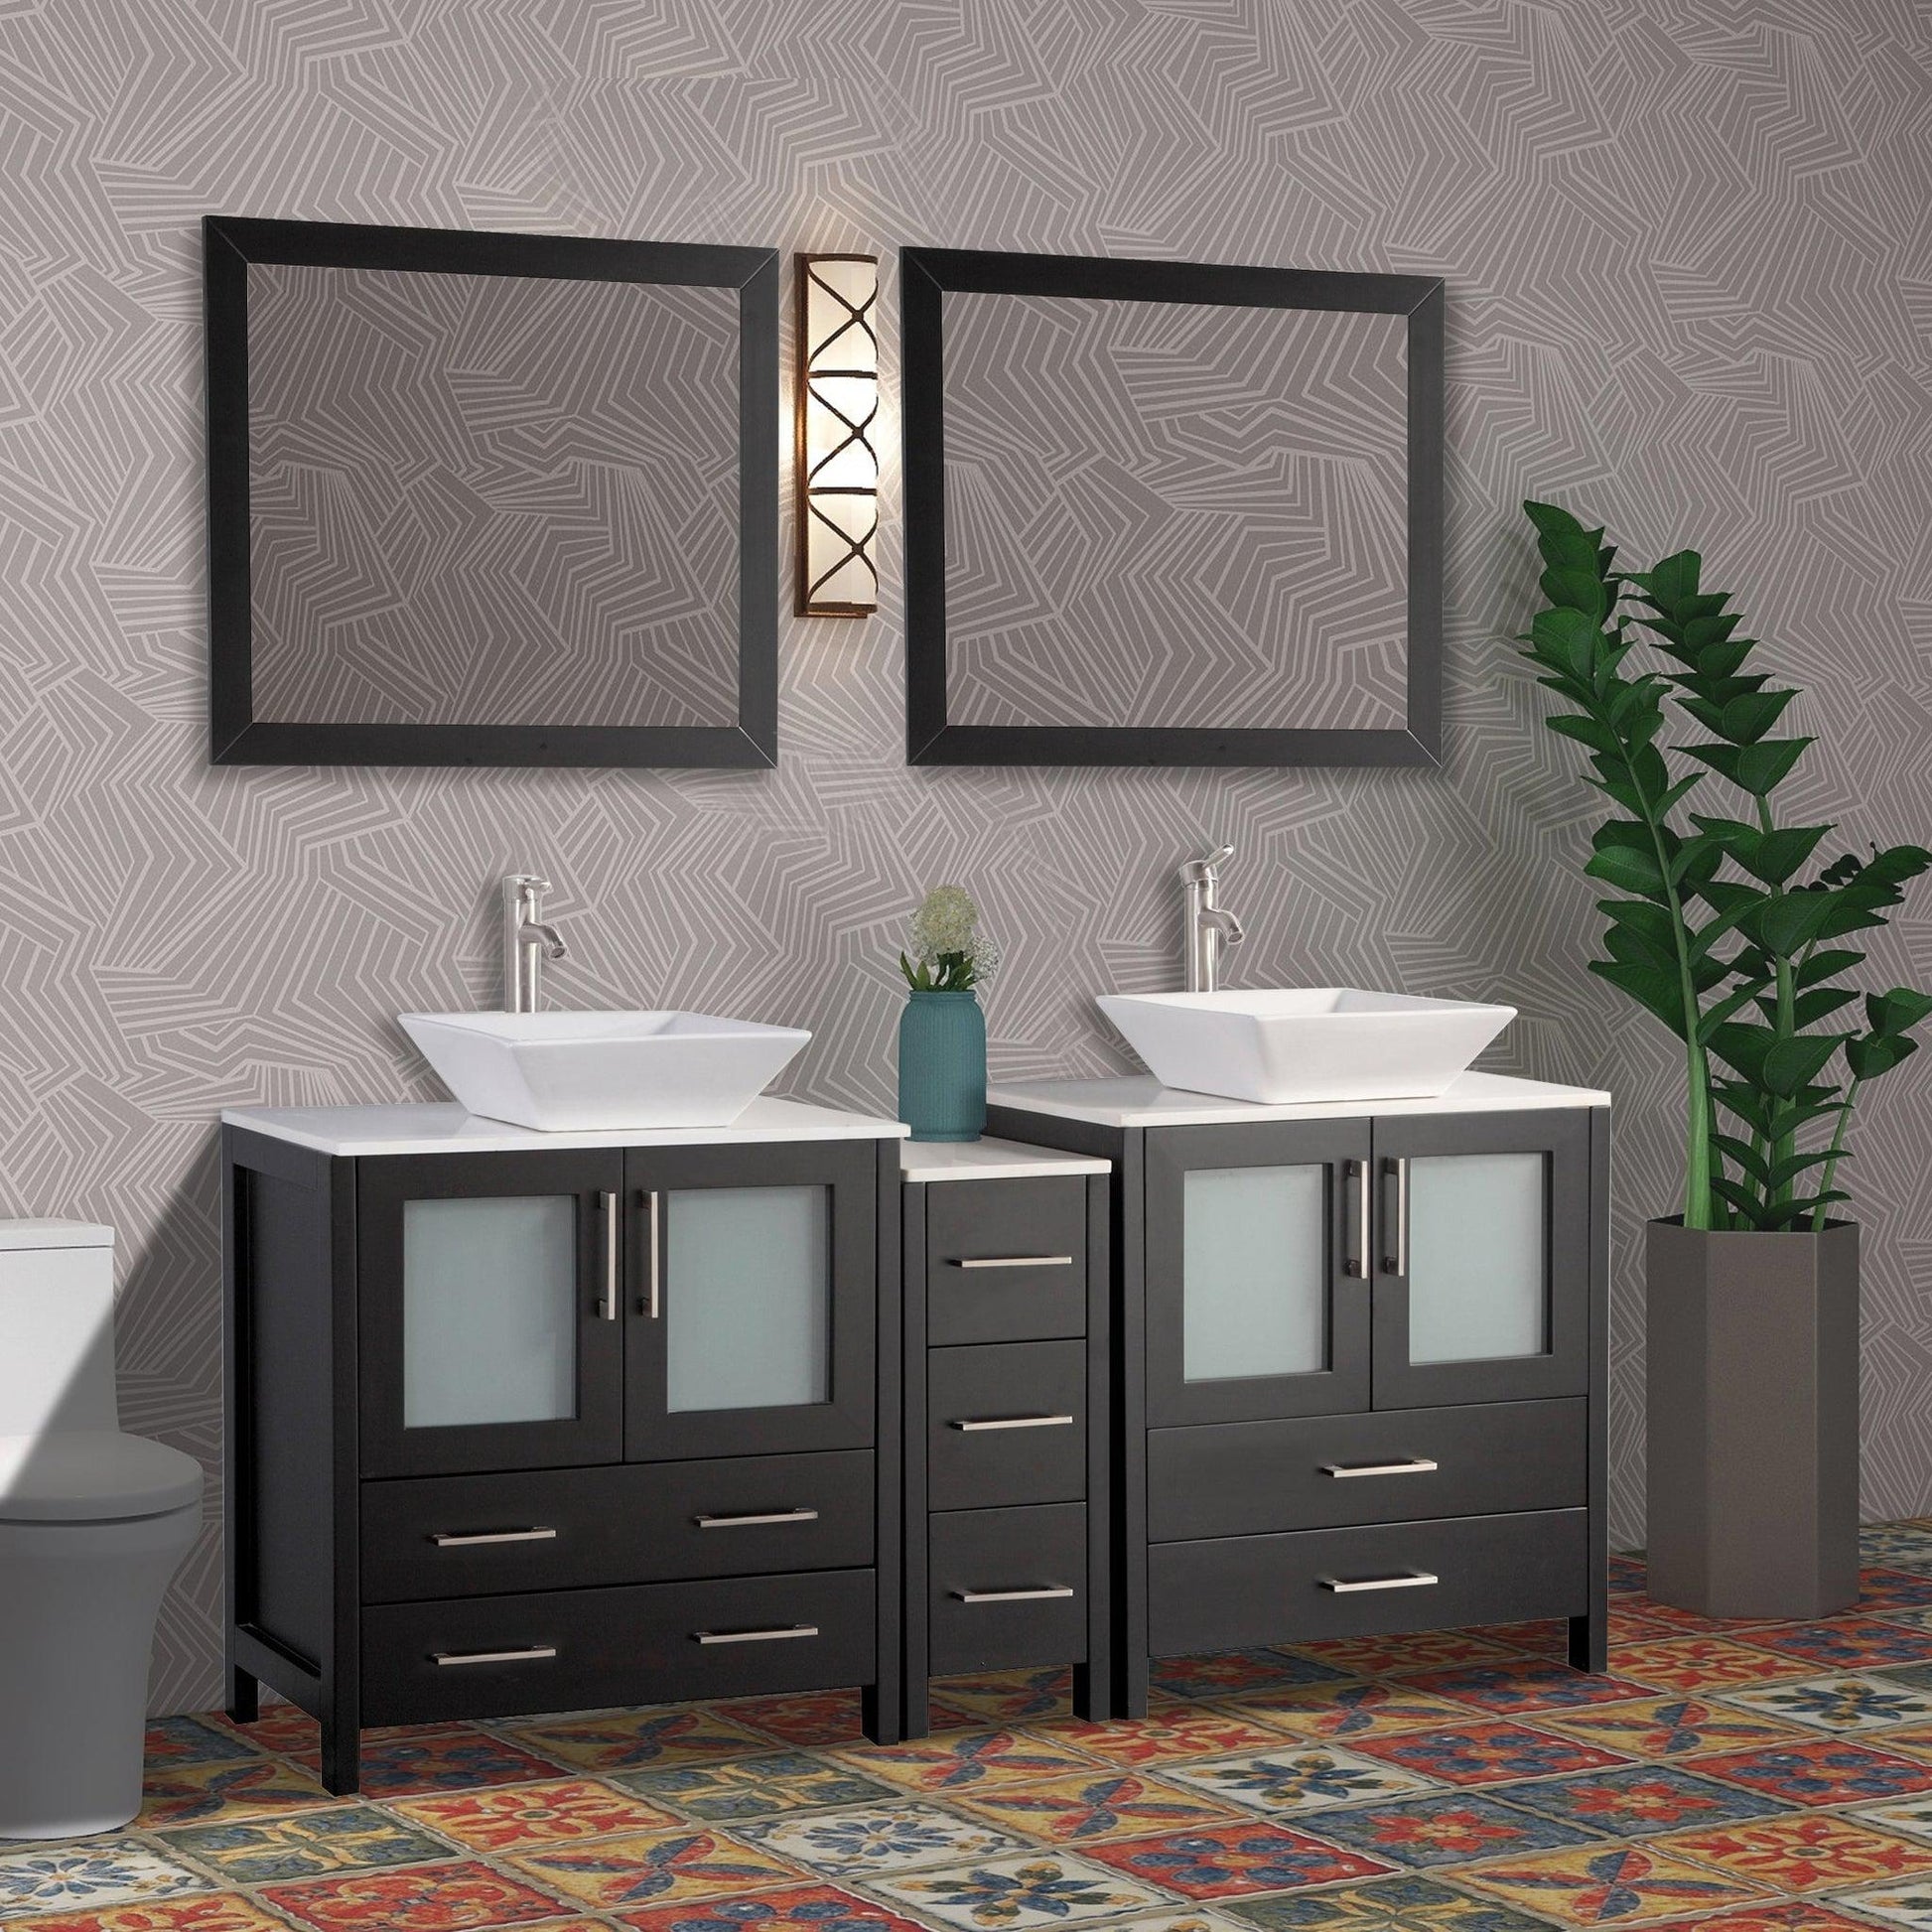 Vanity Art Ravenna 72" Double Espresso Freestanding Vanity Set With White Engineered Marble Top, Ceramic Vessel Sink, 1 Side Cabinet and 2 Mirrors